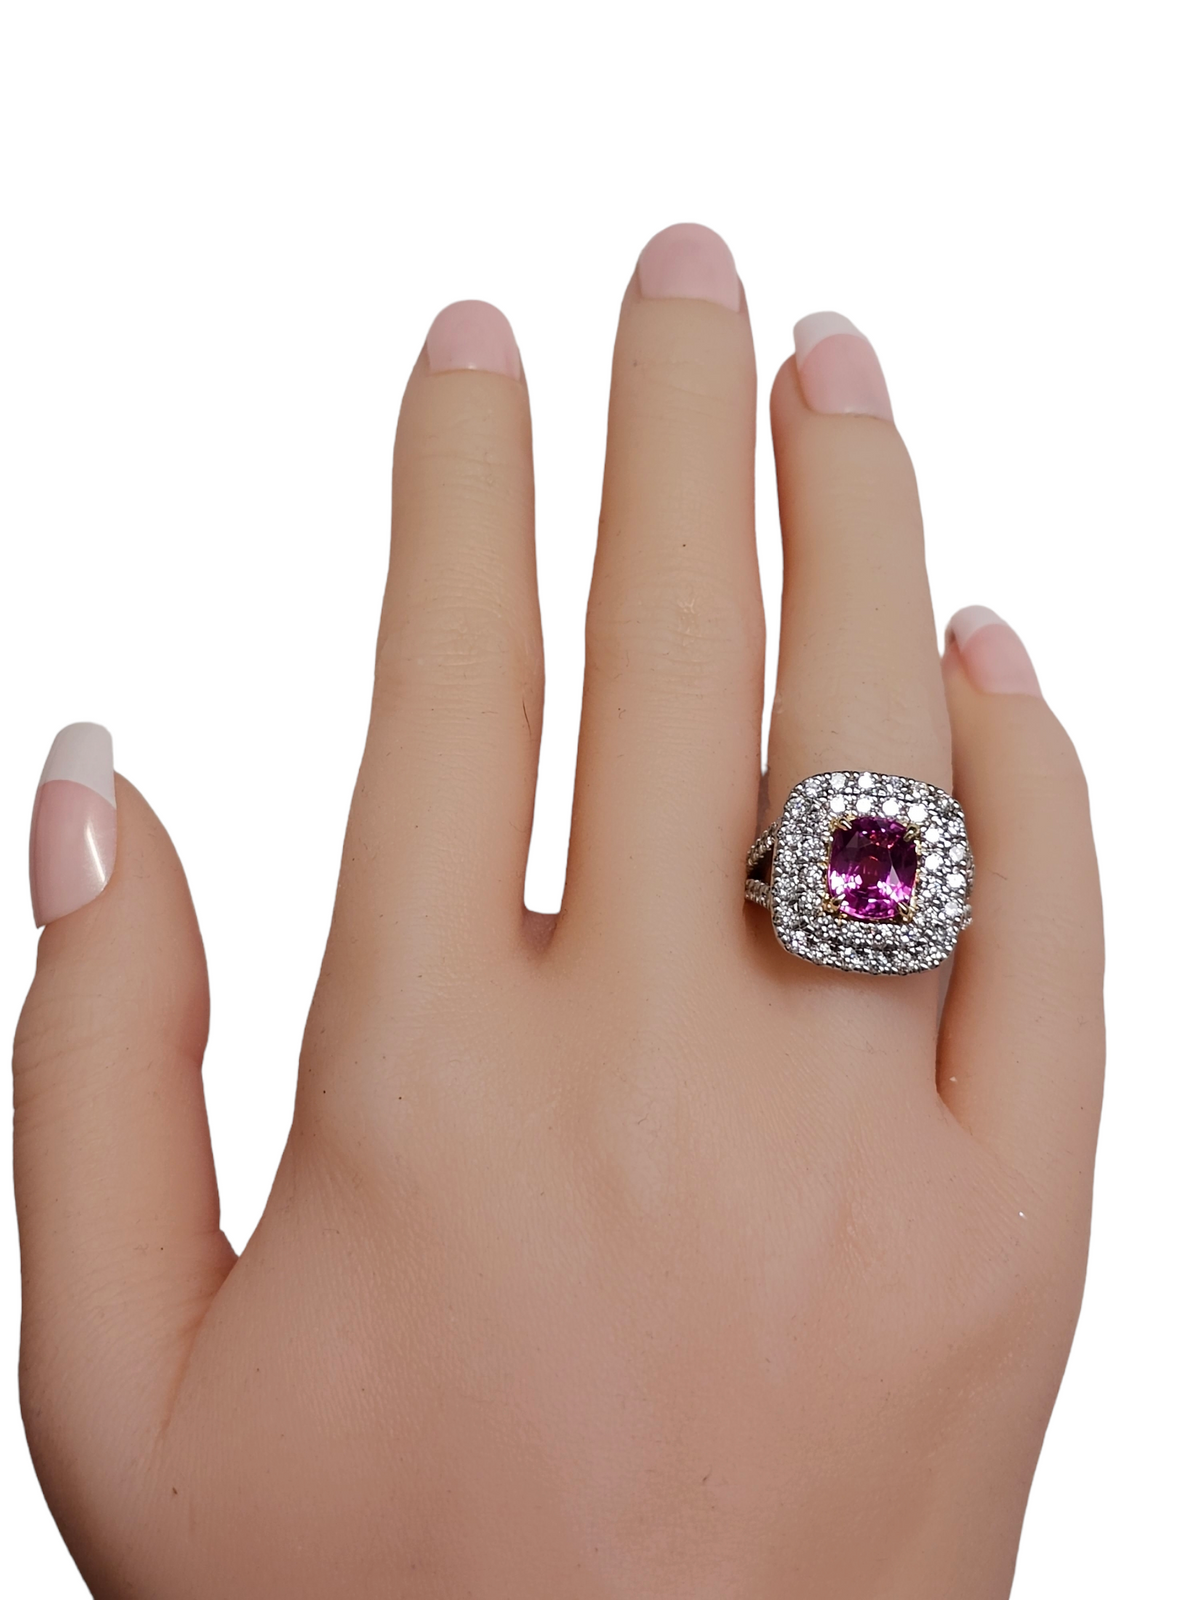 18Kt White Gold Pink Sapphire and Diamond Ring